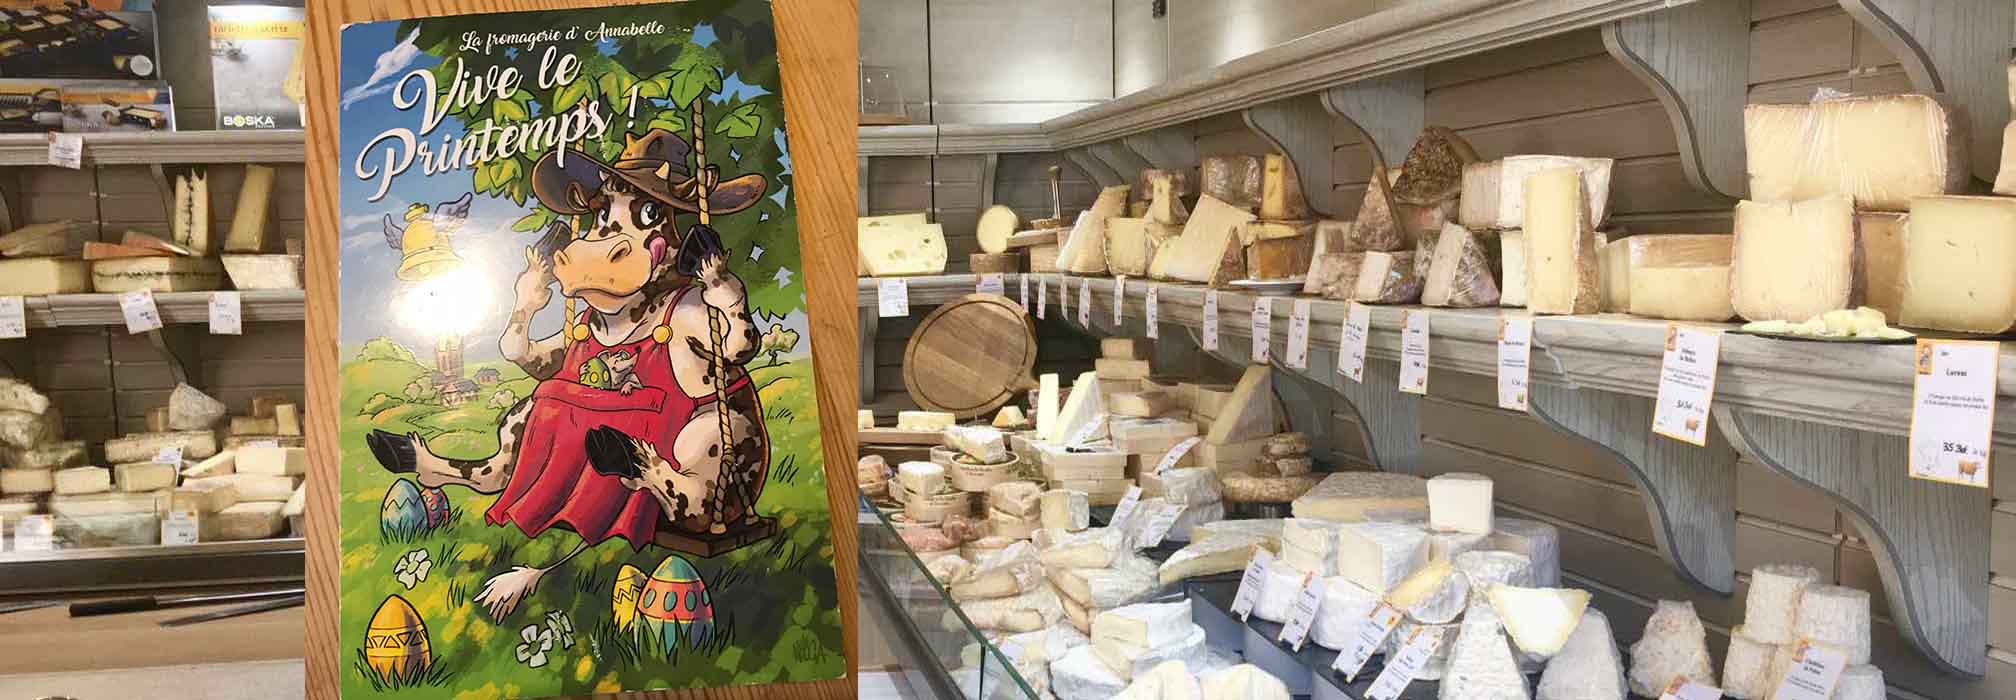 French cheese shop with inset of seasonal postcard saying Vive Spring in French